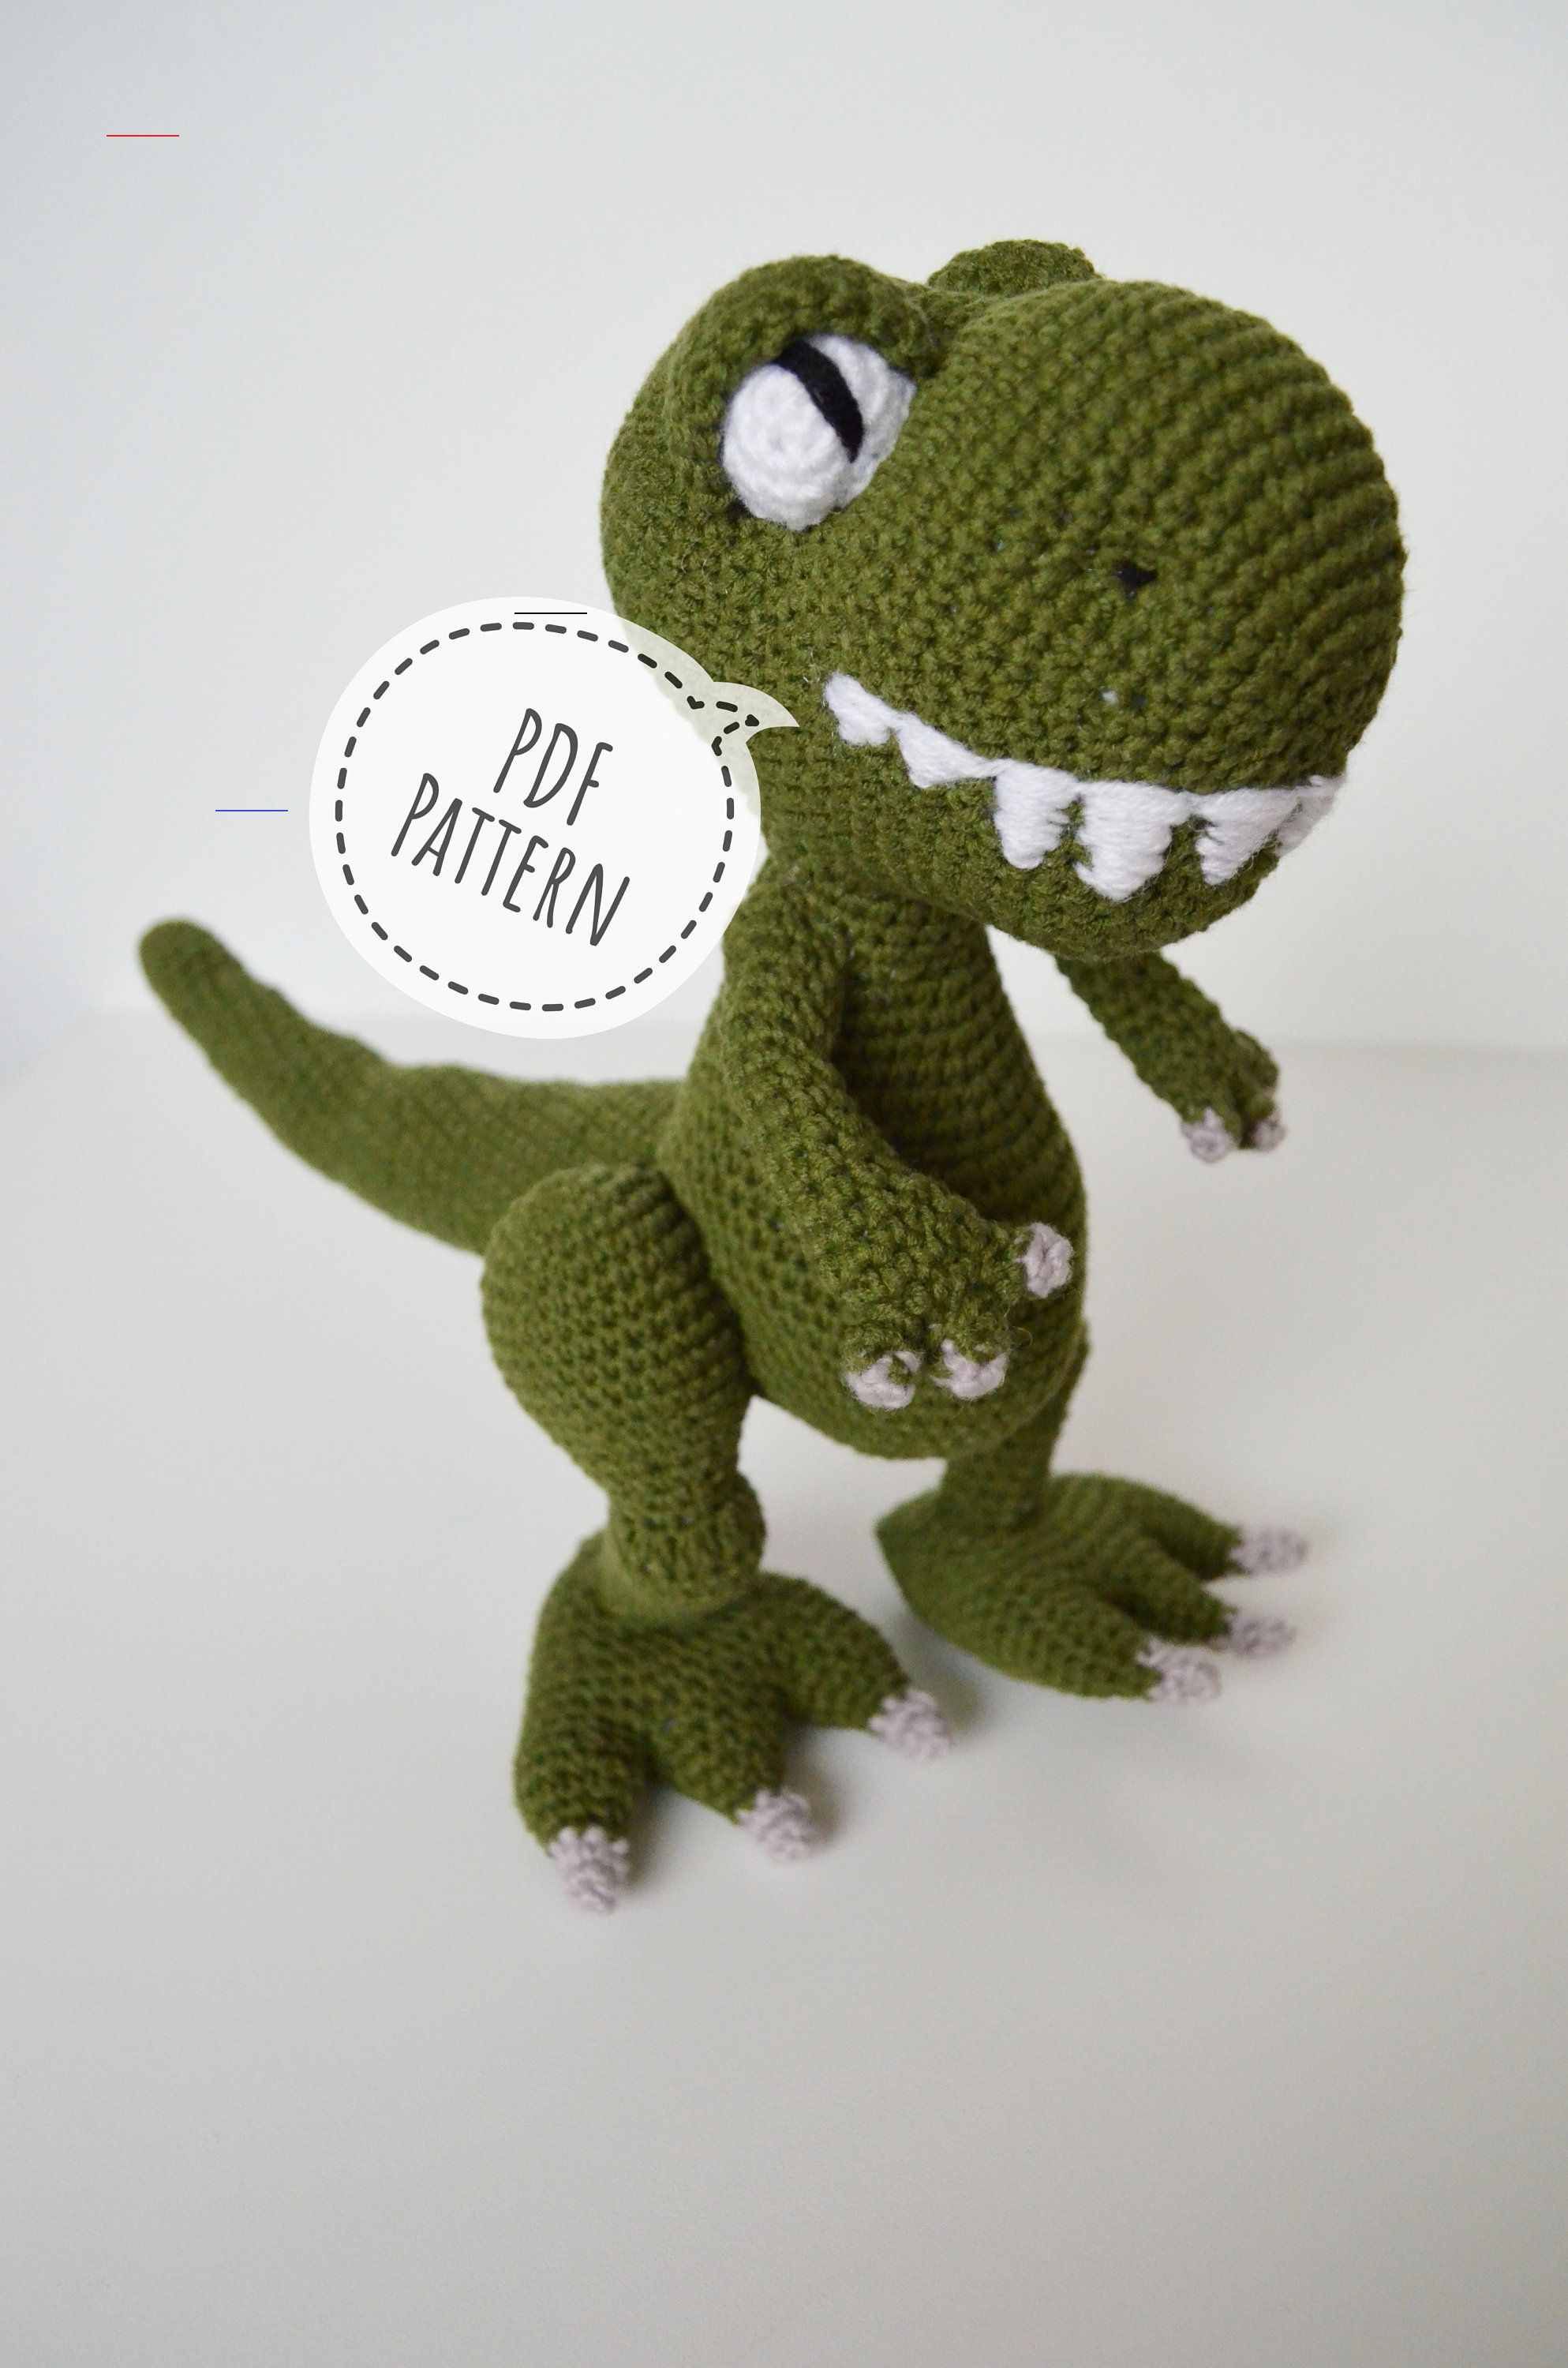 Pin by Marie claire Wyntein on T rex in 2020 | Crochet dinosaur